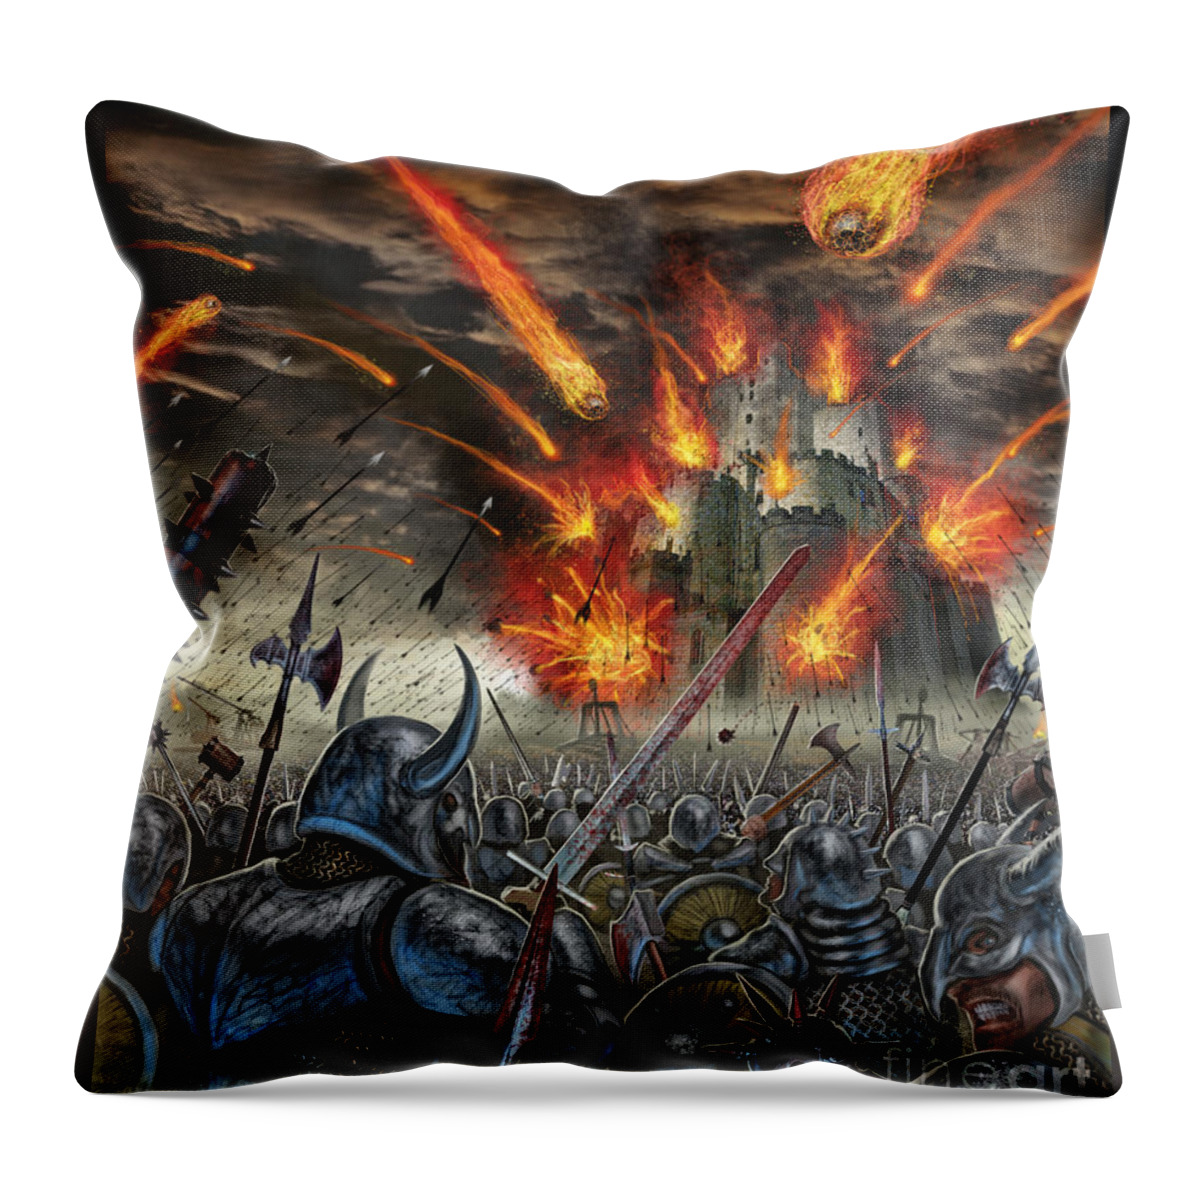 Habitual Defilement Throw Pillow featuring the mixed media It Will Be Taken Down by Tony Koehl